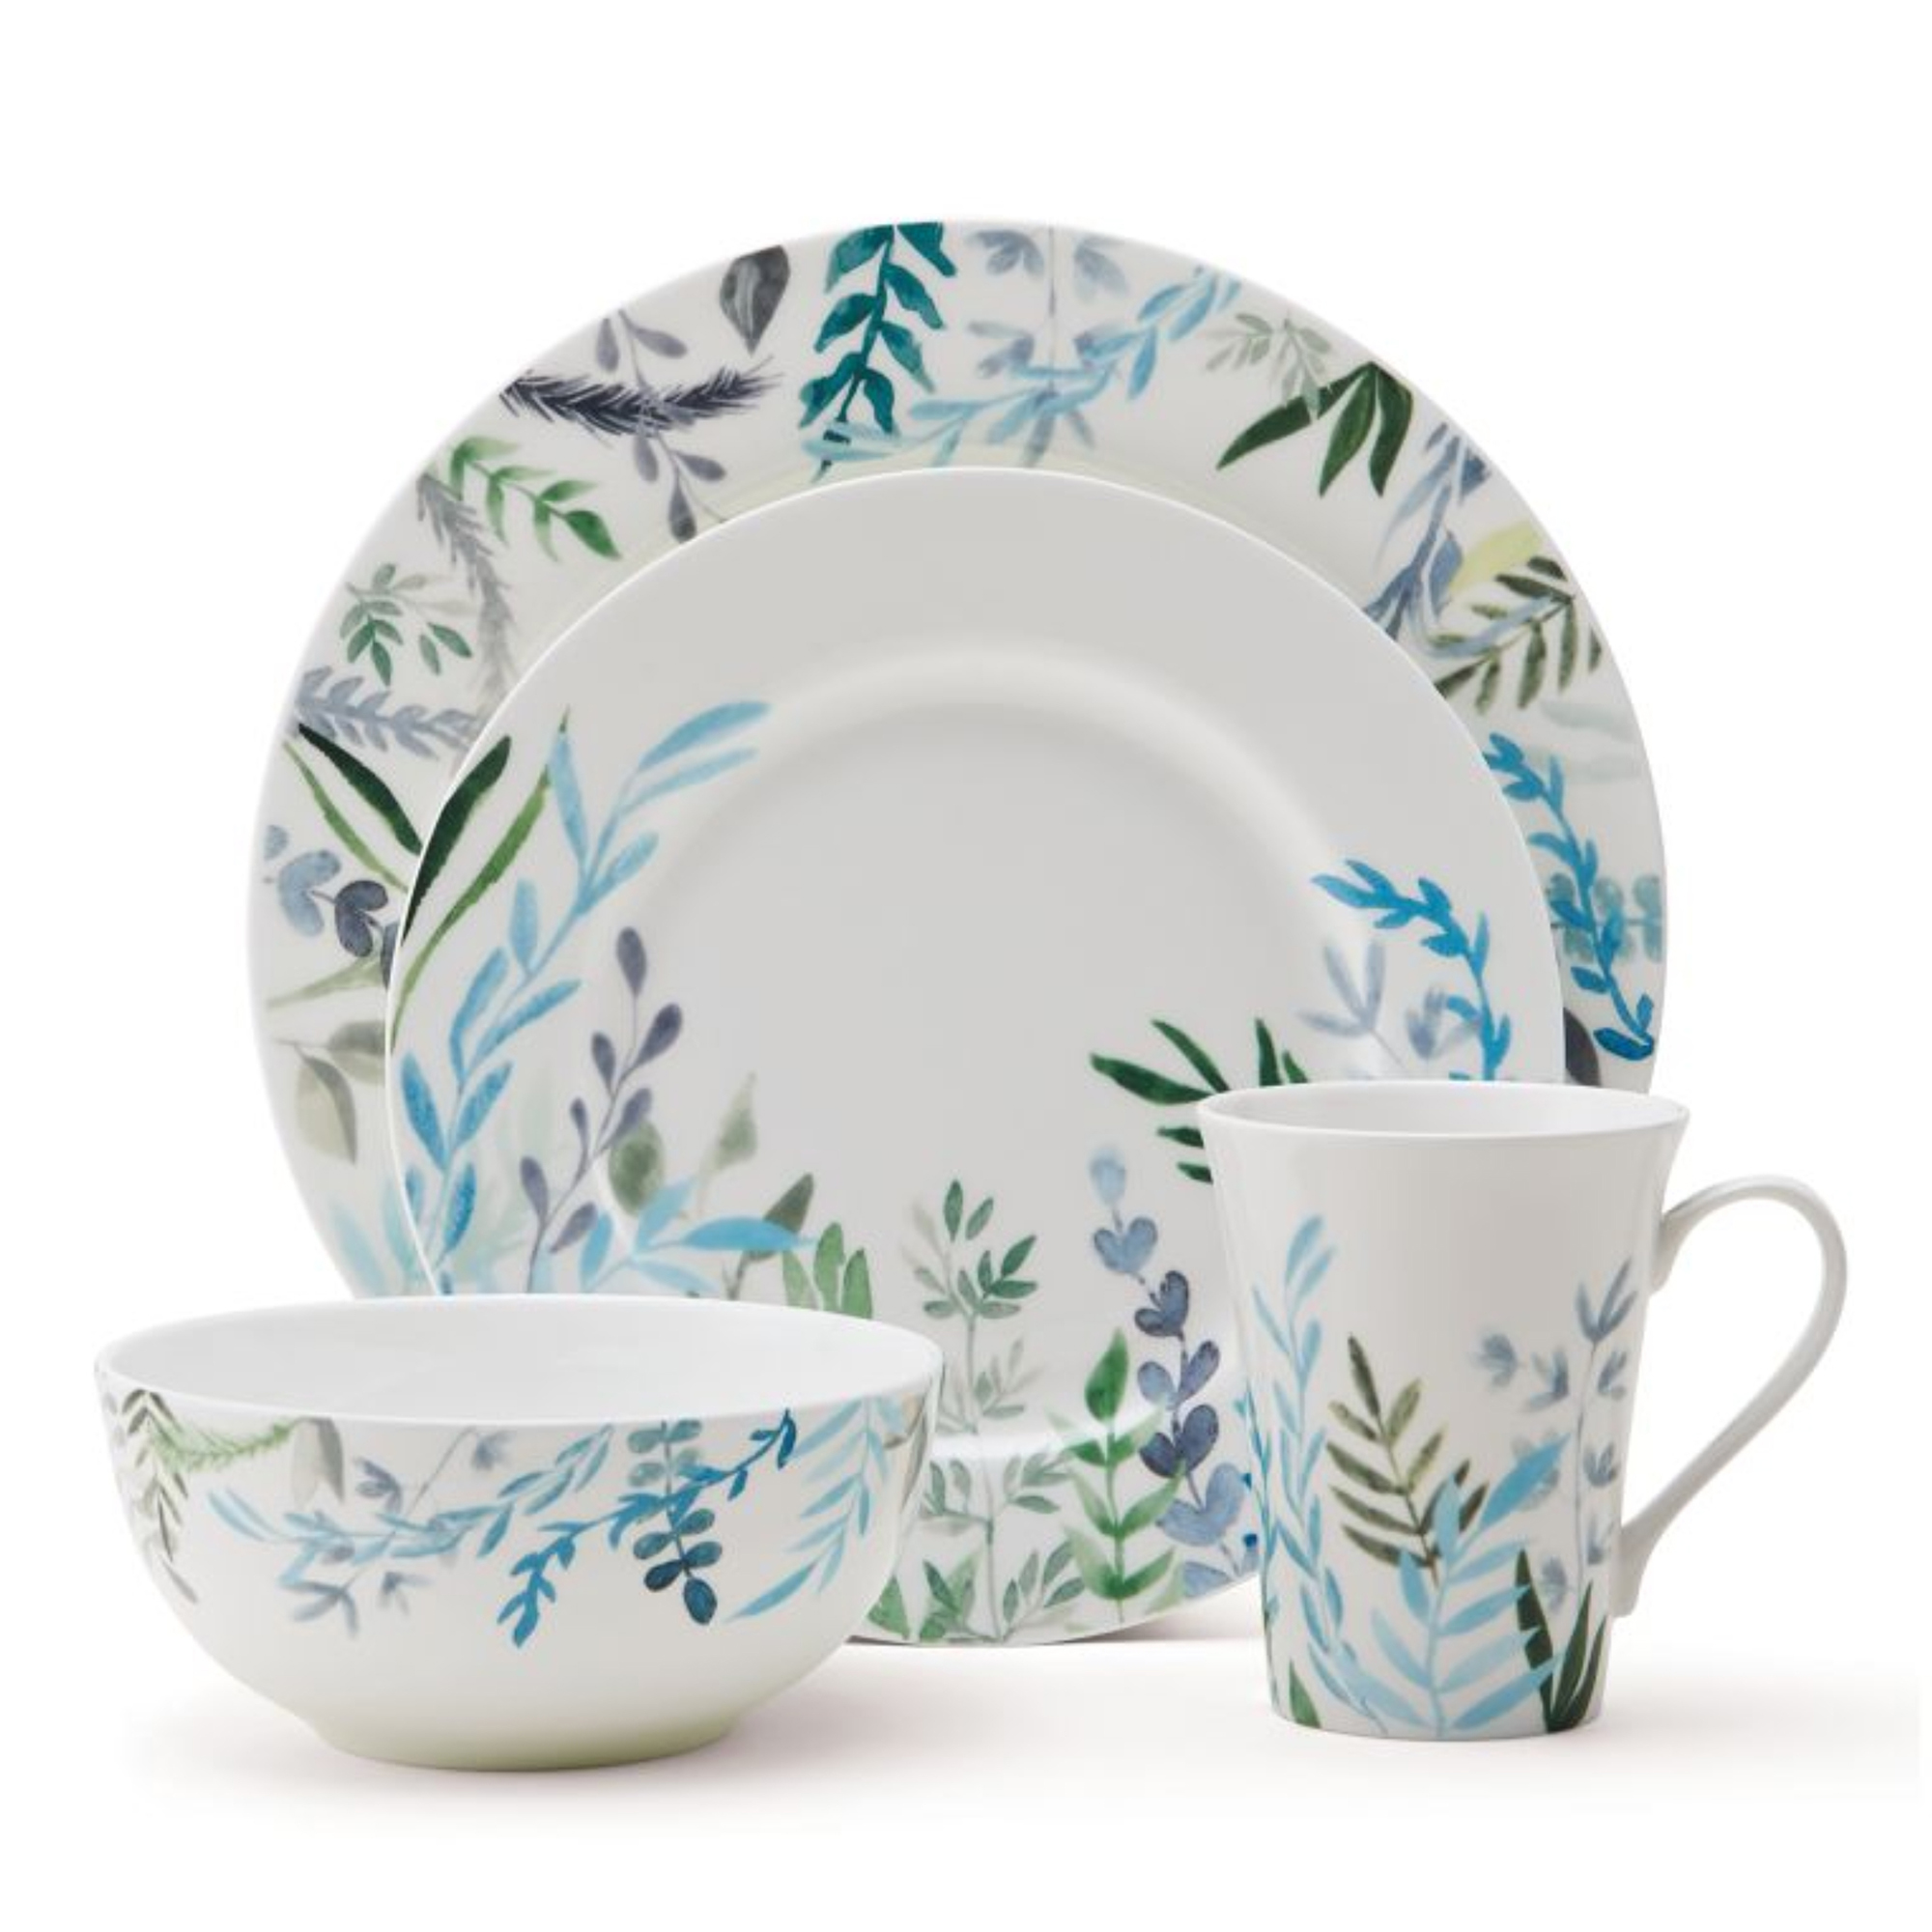 Mikasa Monet cup and saucer 10 available 